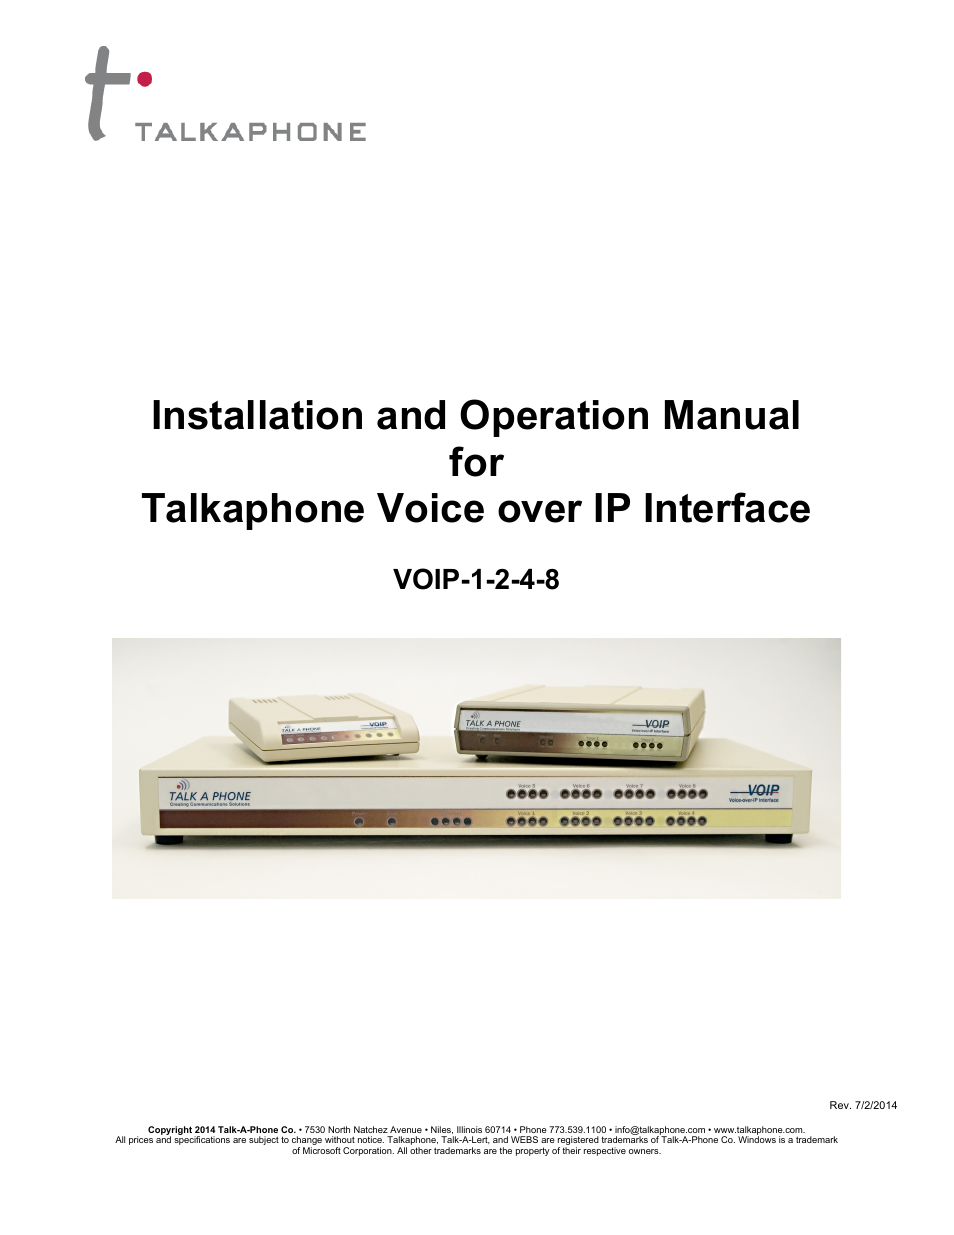 VOIP-2 VoIP Interface (2 channels)